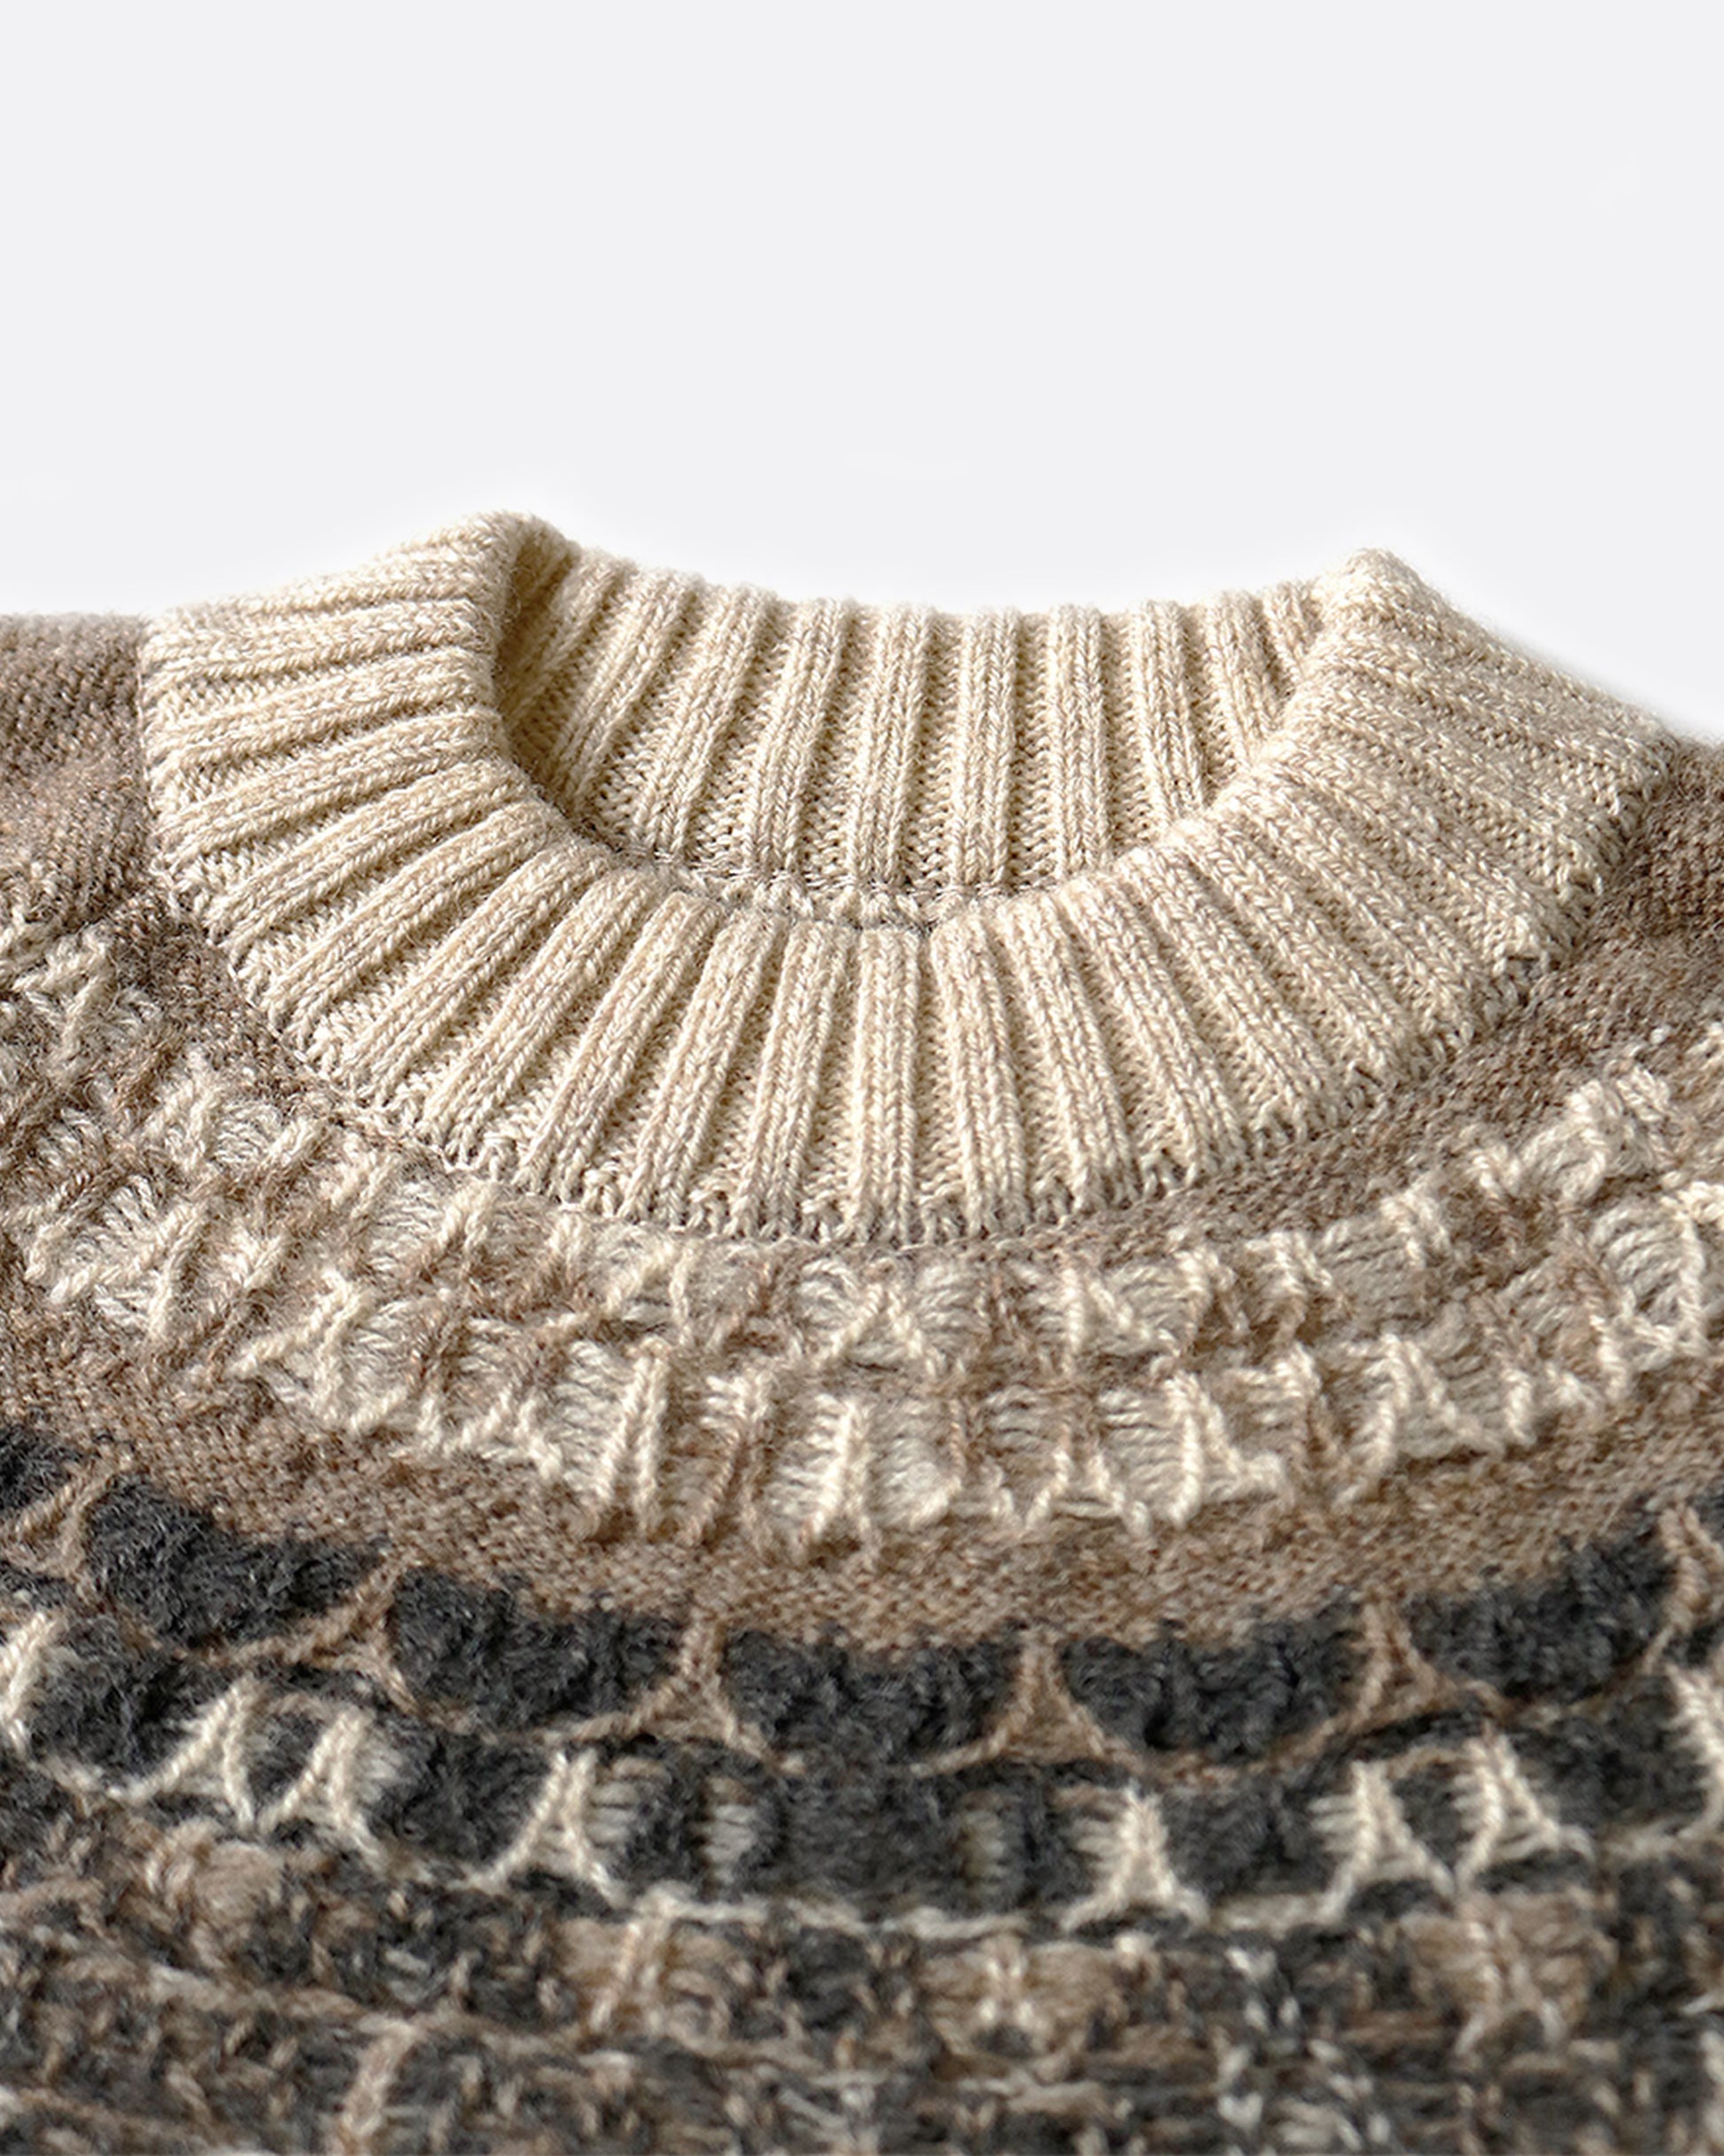 A close up of the Nordic pattern around the collar of the pullover sweater.